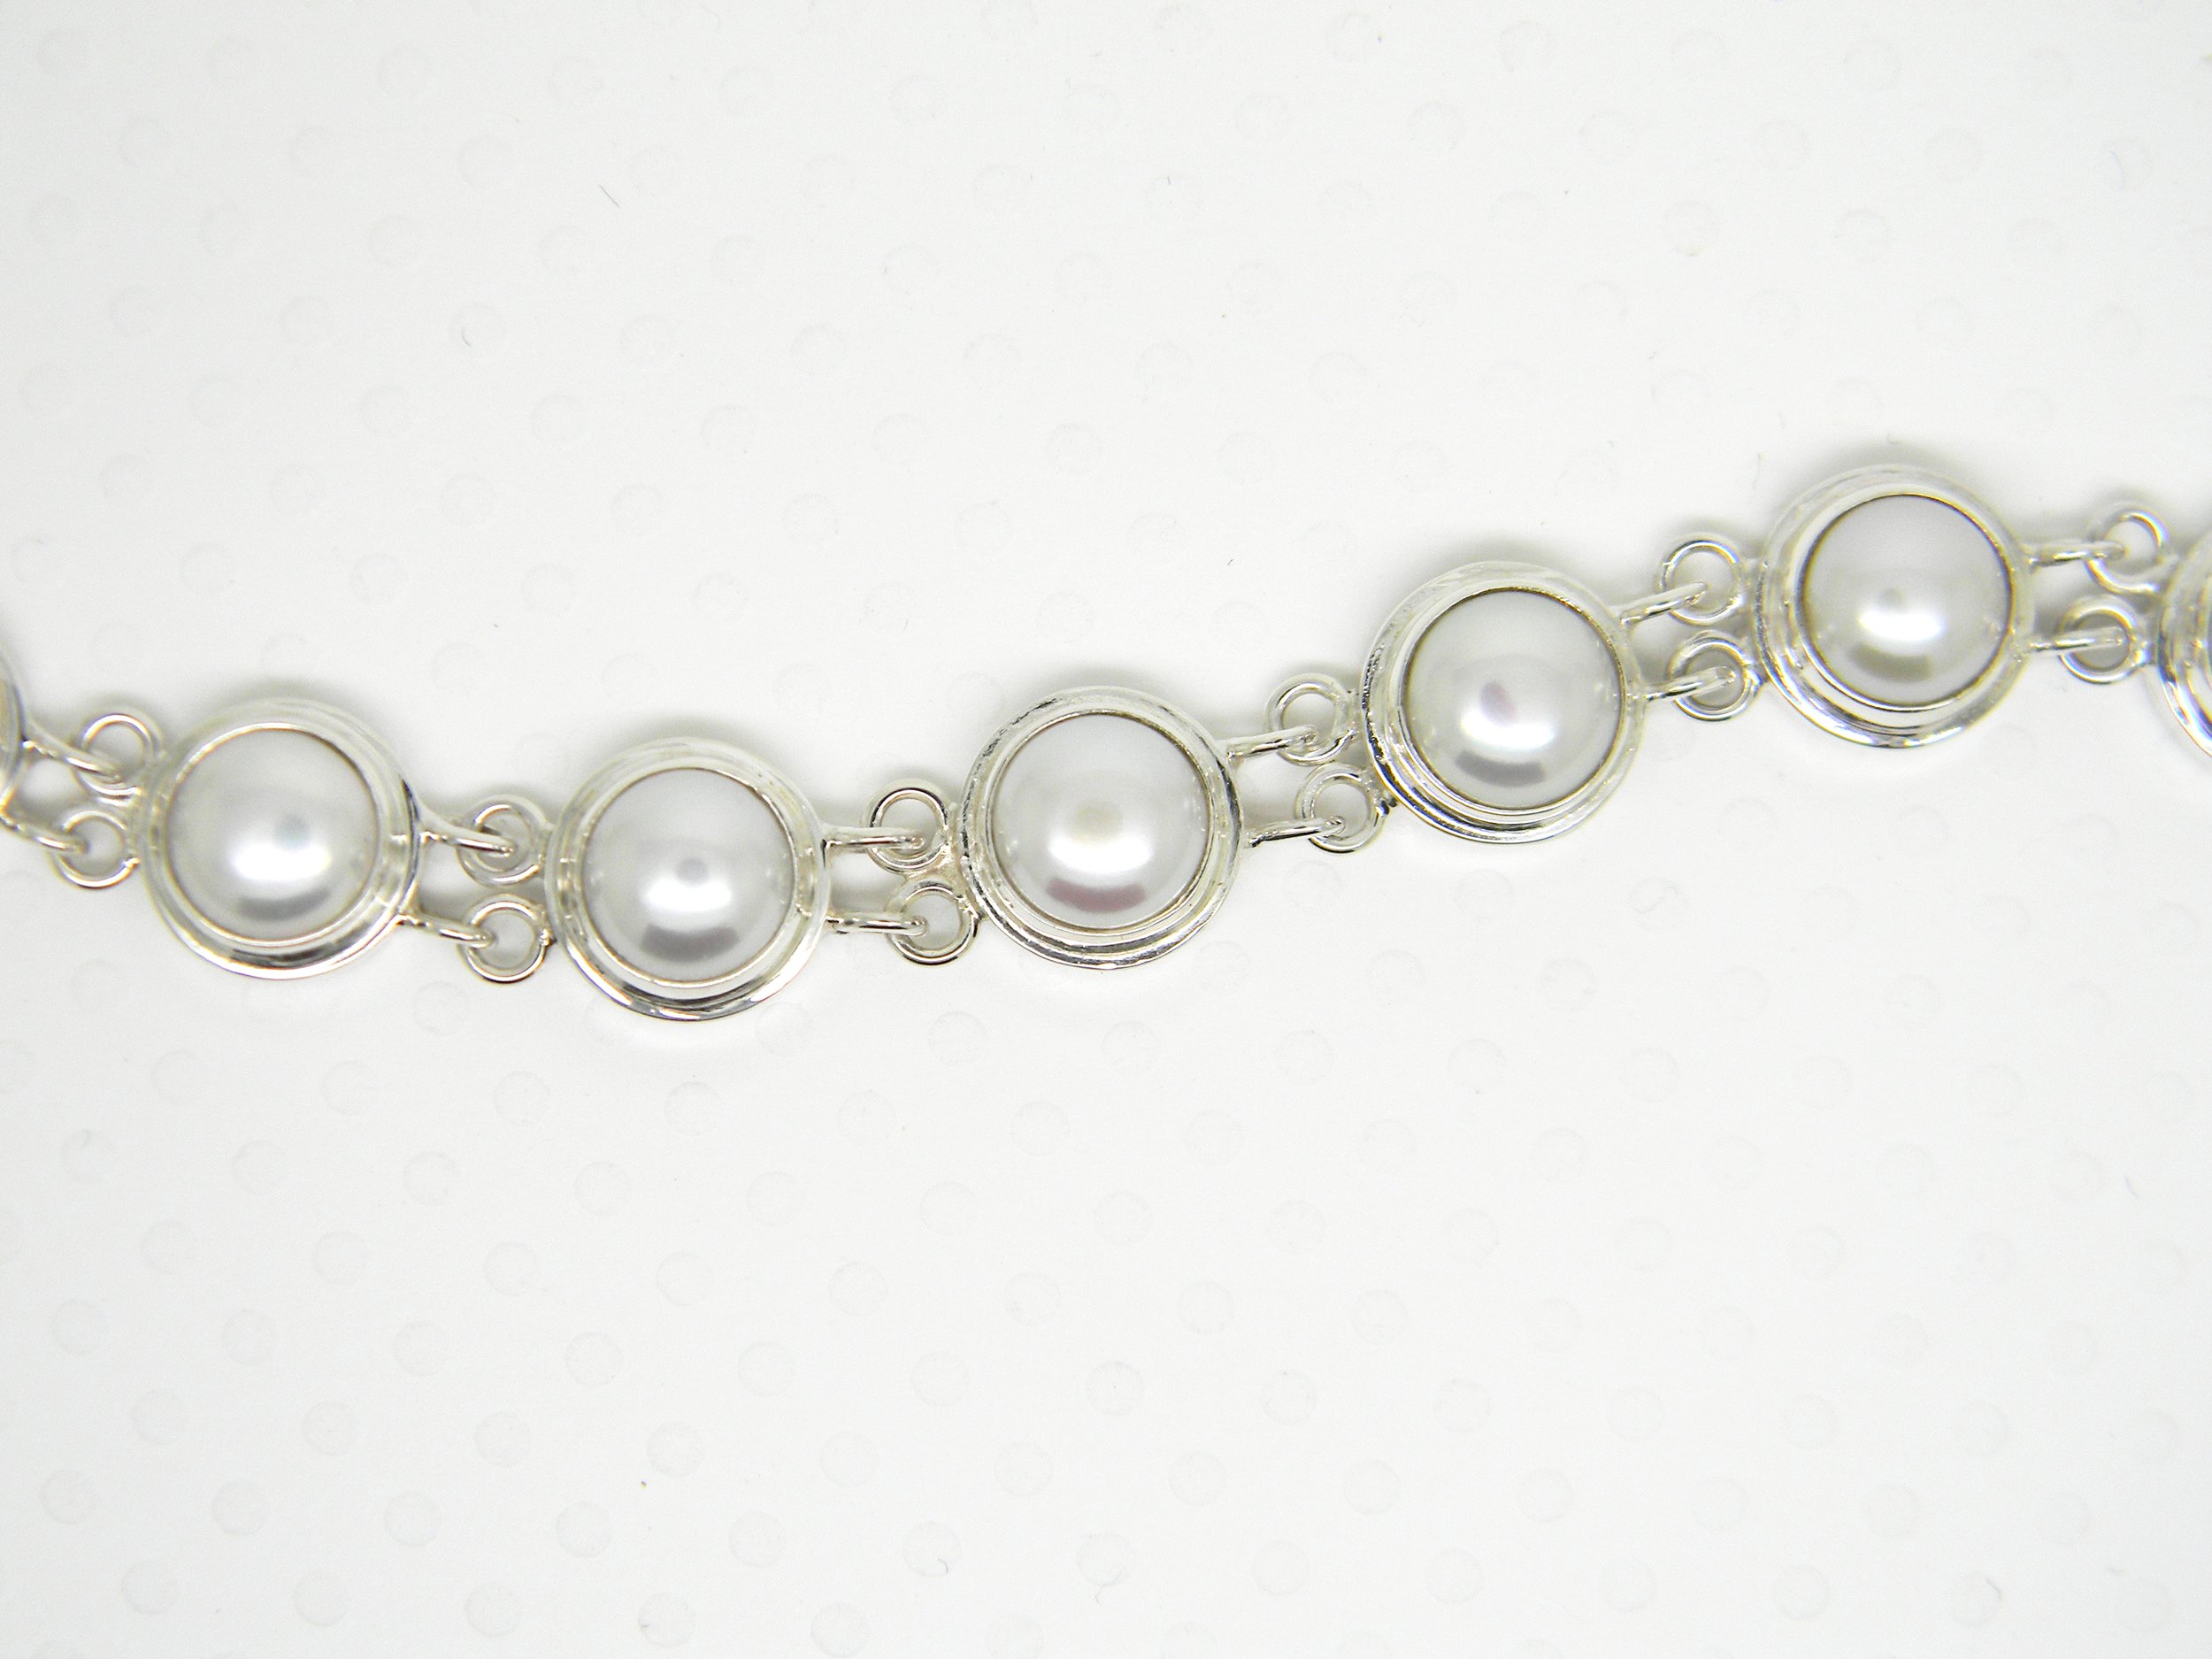 COCOA champagne pearl bracelet - Carrie Whelan Designs